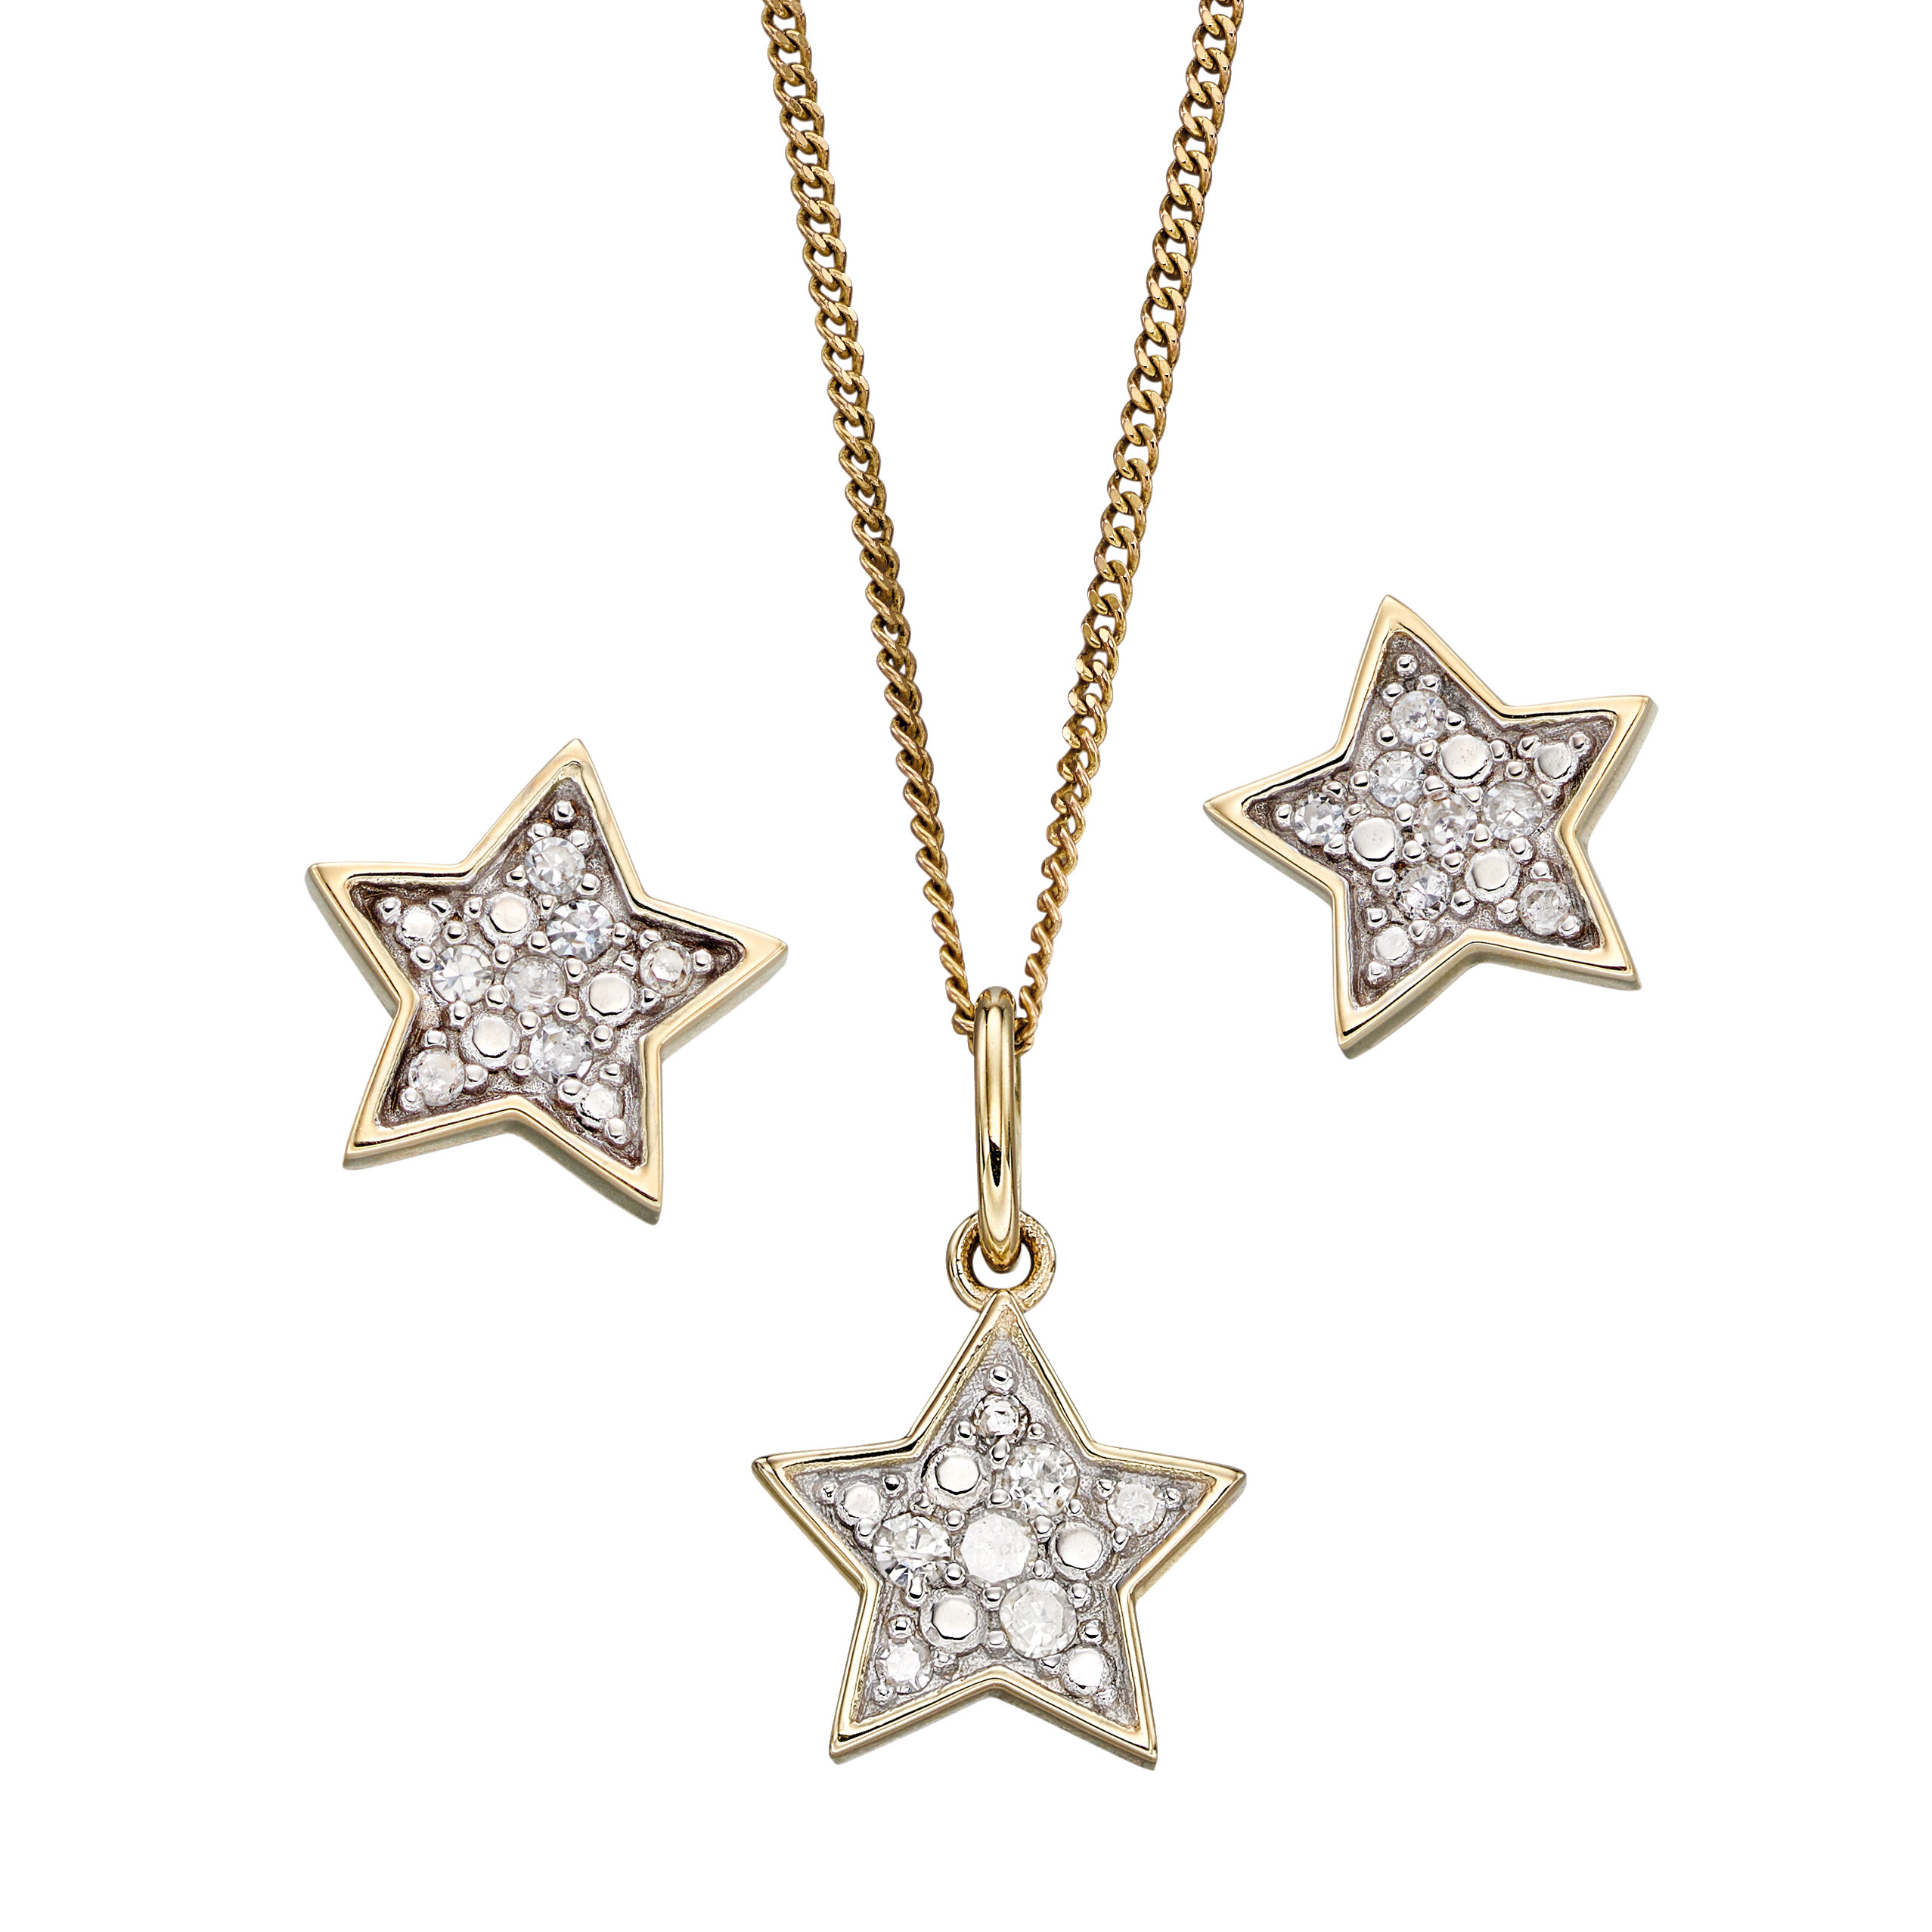 9ct yellow gold diamond set star pendant on chain £225 and stud earrings £149 from Sally Thorntons blog at AA Thornton Jeweller Kettering Northampton